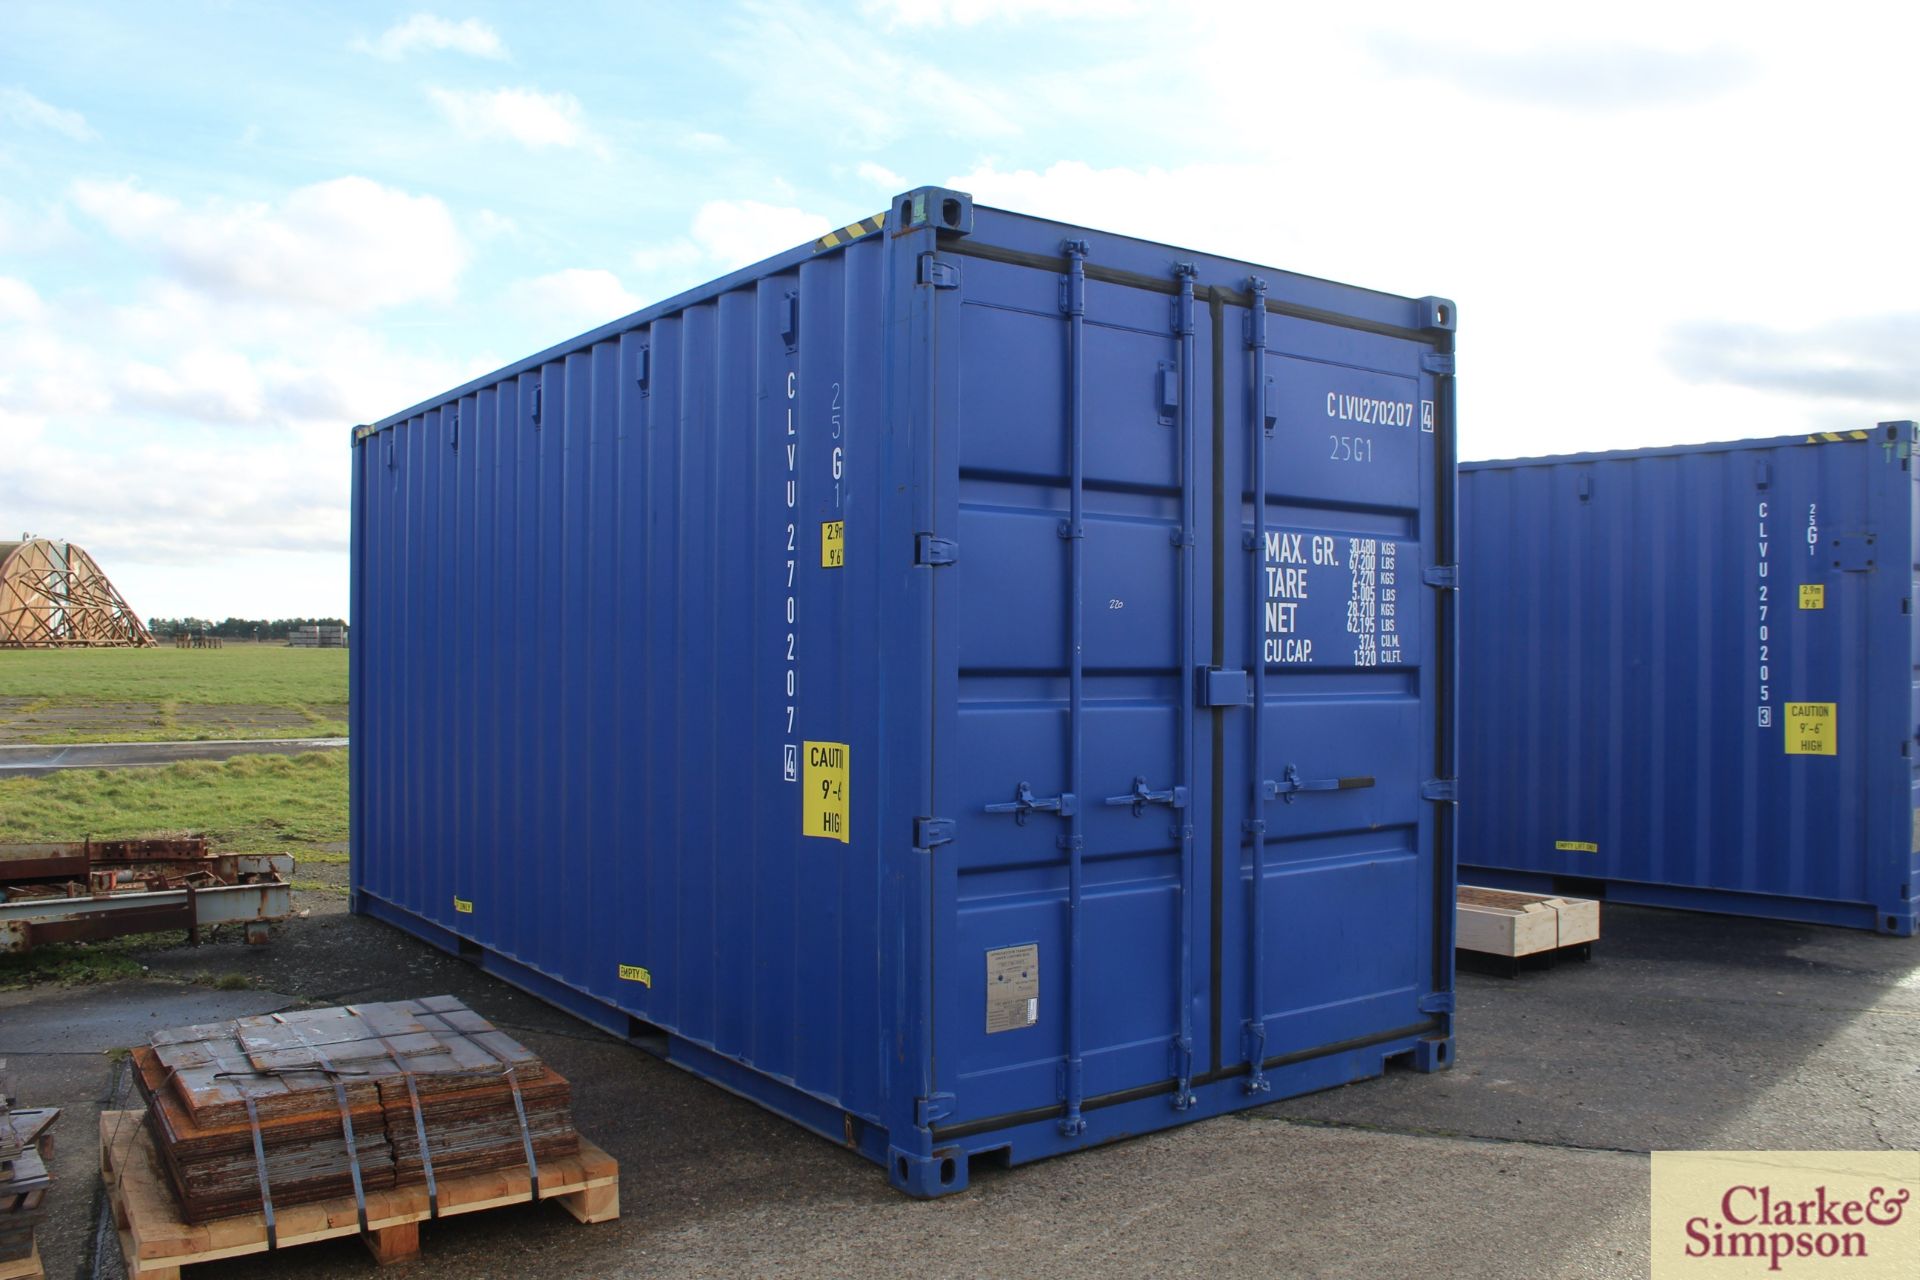 20ft x 9ft6in high shipping container. 2019. Partially reinforced to interior to include plates - Image 3 of 19